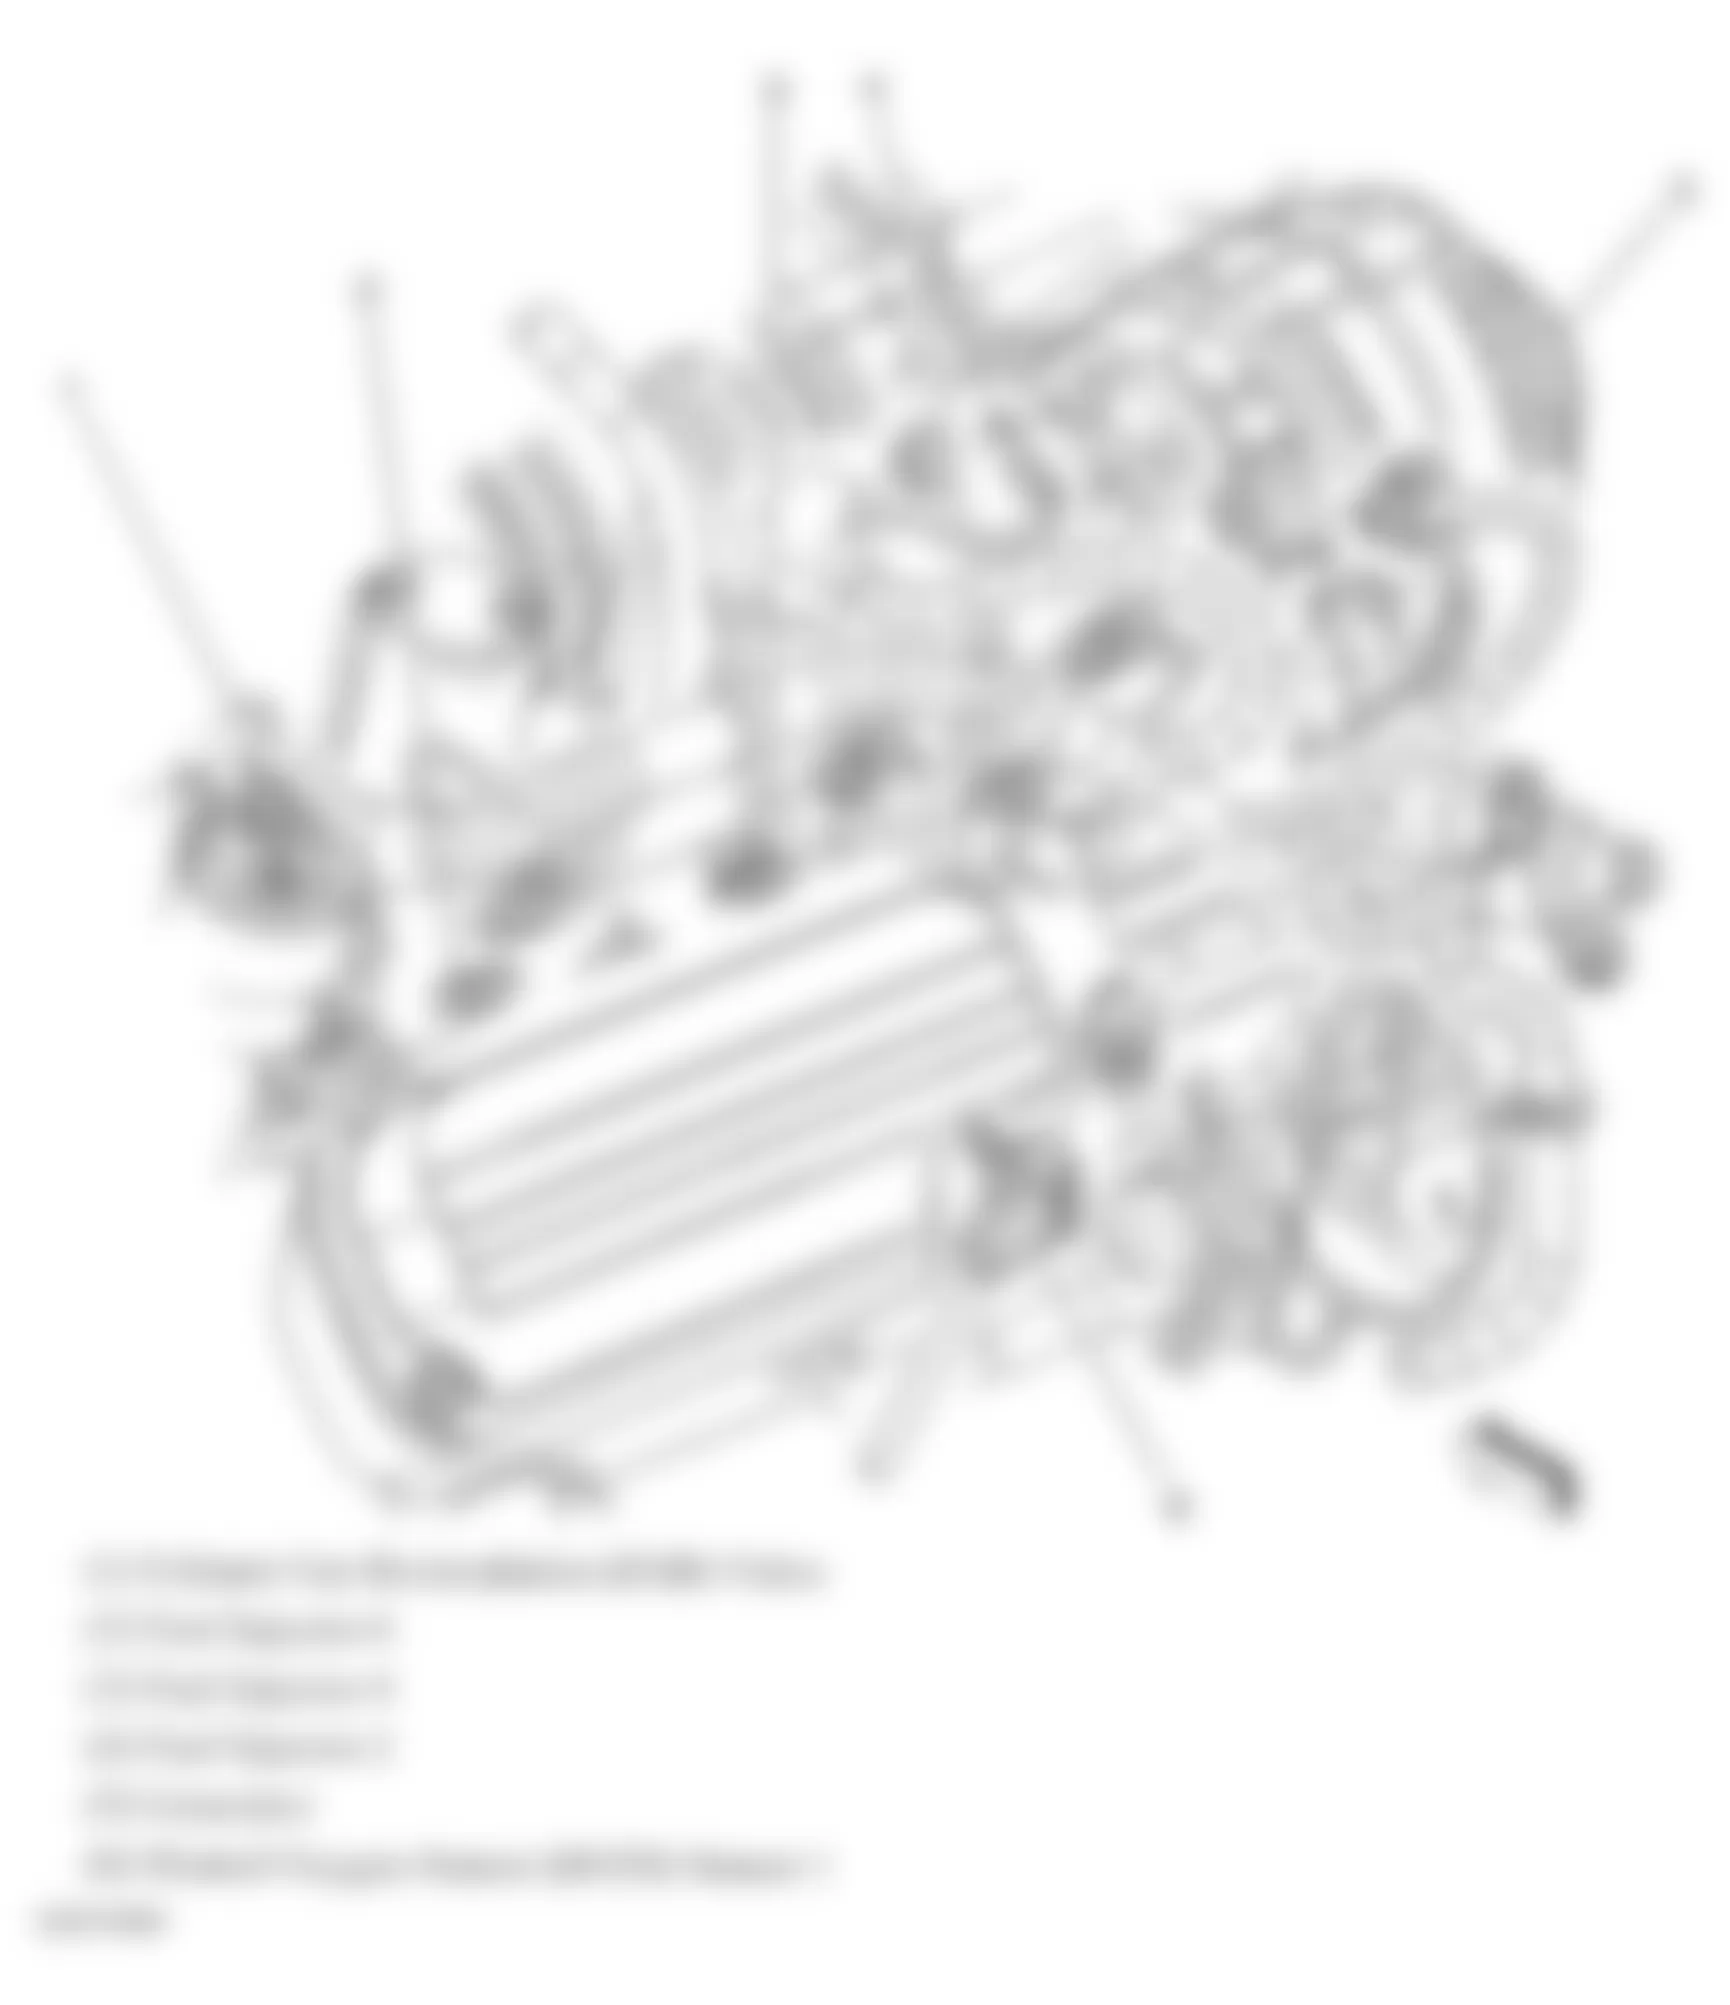 Buick LaCrosse CXS 2008 - Component Locations -  Left Rear Of Engine (3.8L)